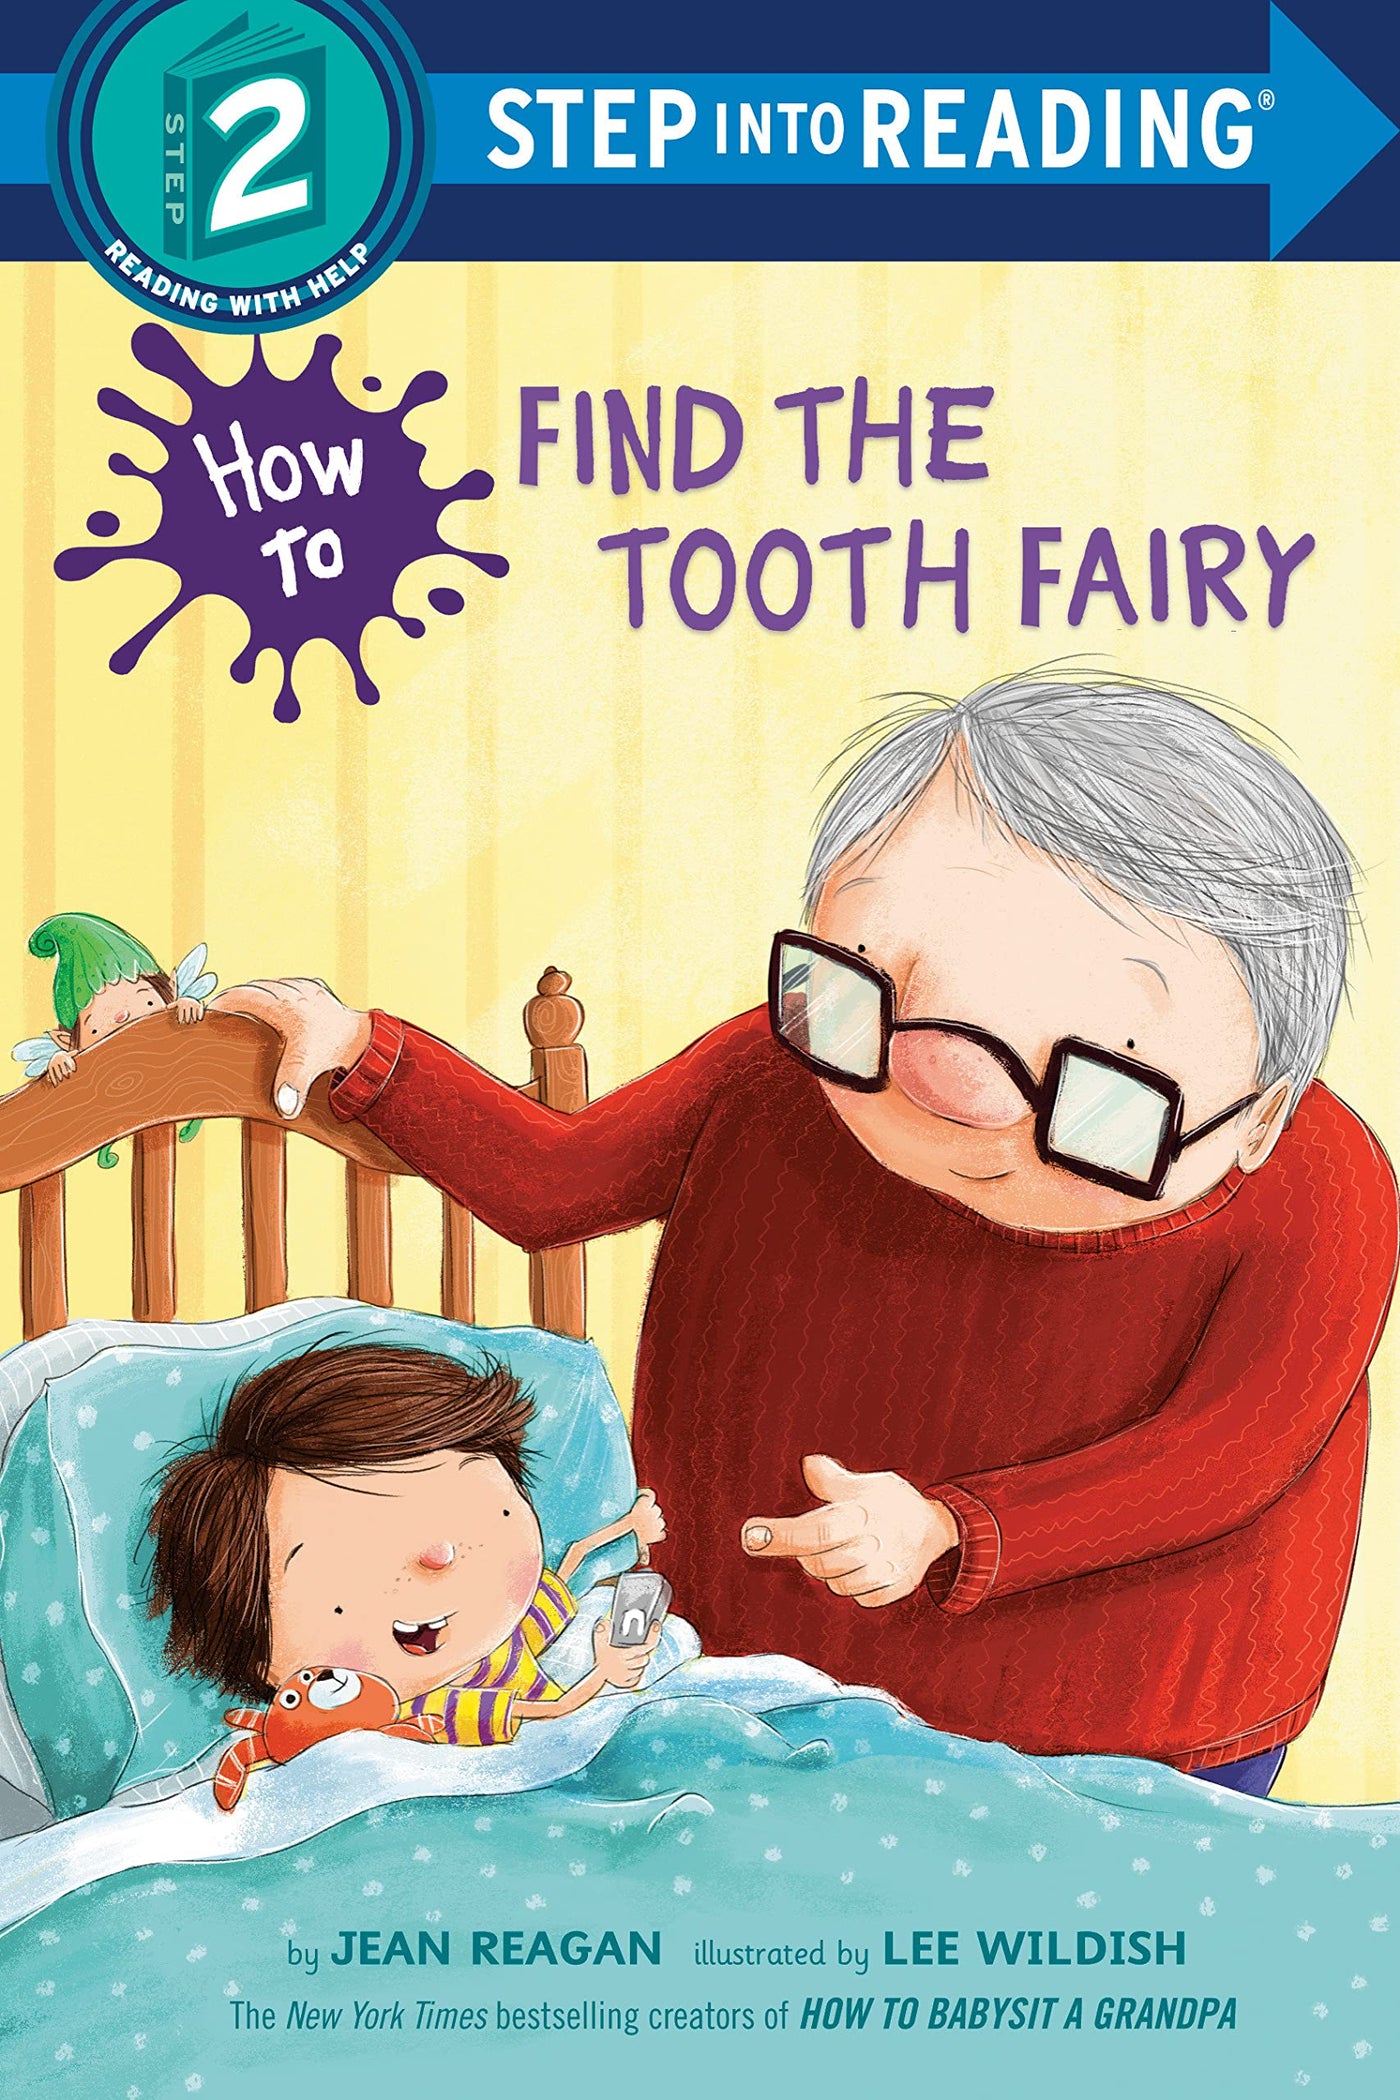 How To Find The Tooth Fairy Step Into Reading Book - Two Little Birds Boutique